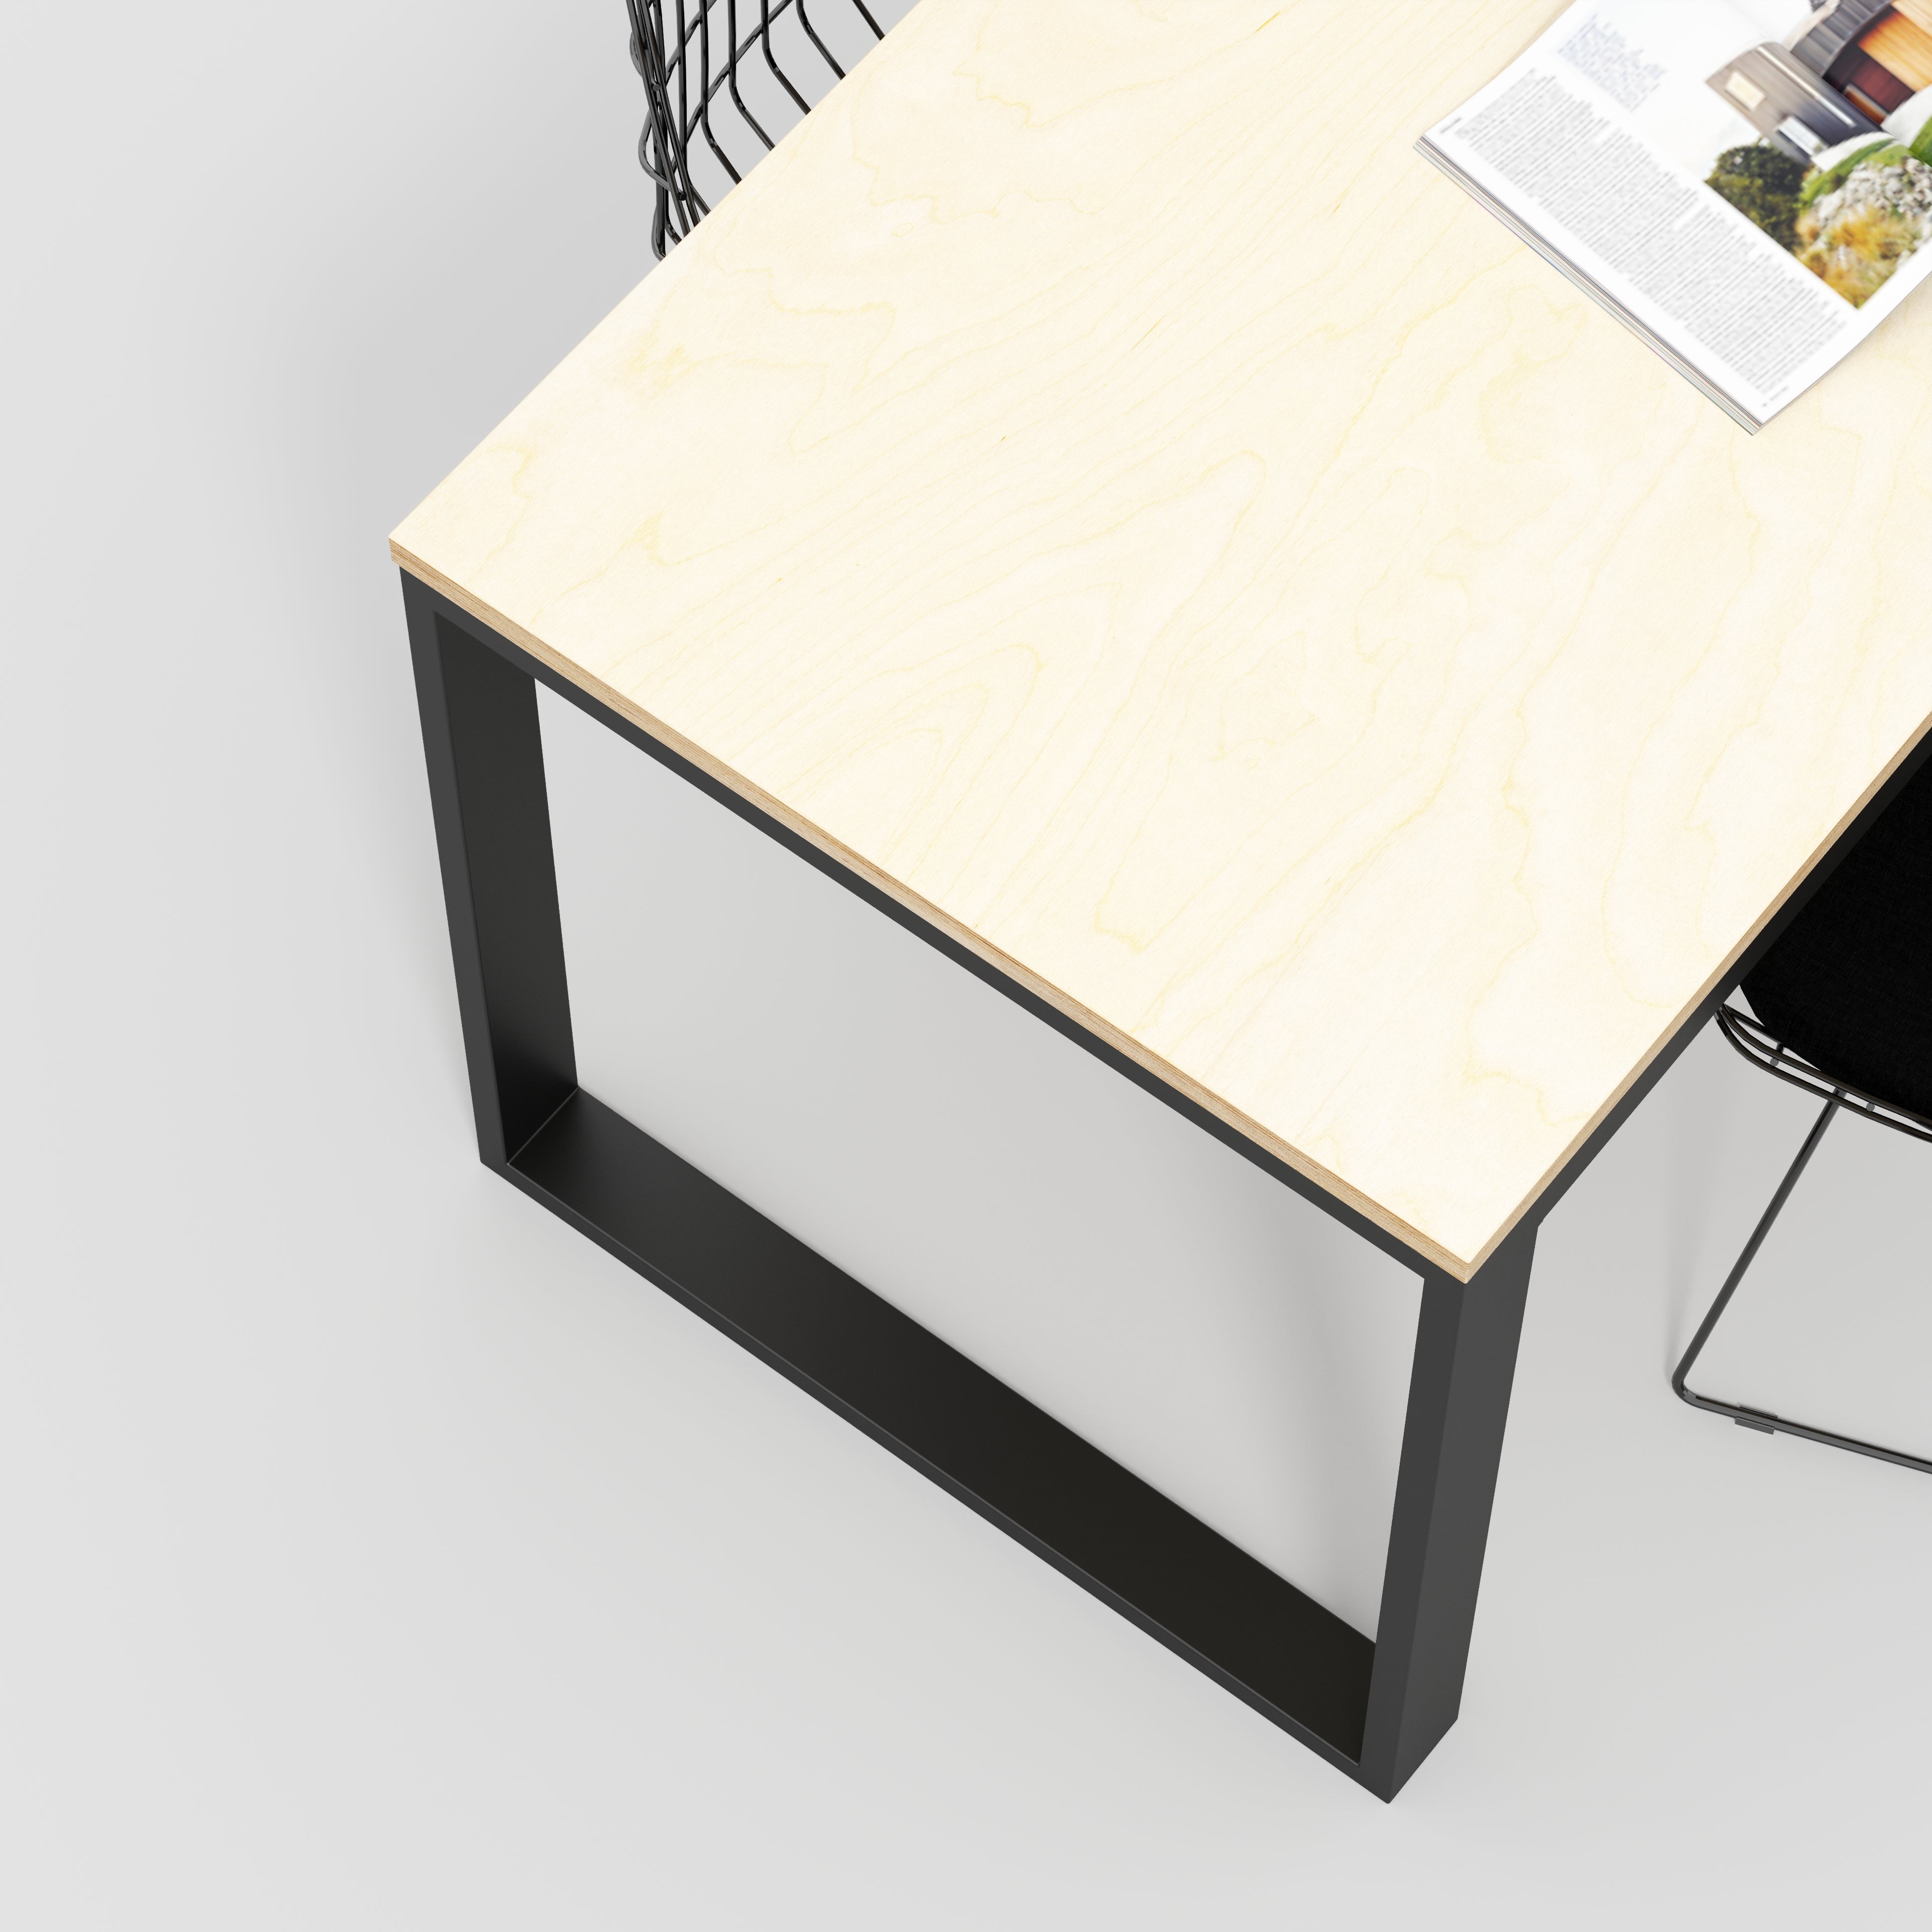 Table with Black Industrial Frame - Plywood Birch - 1200(w) x 745(d)